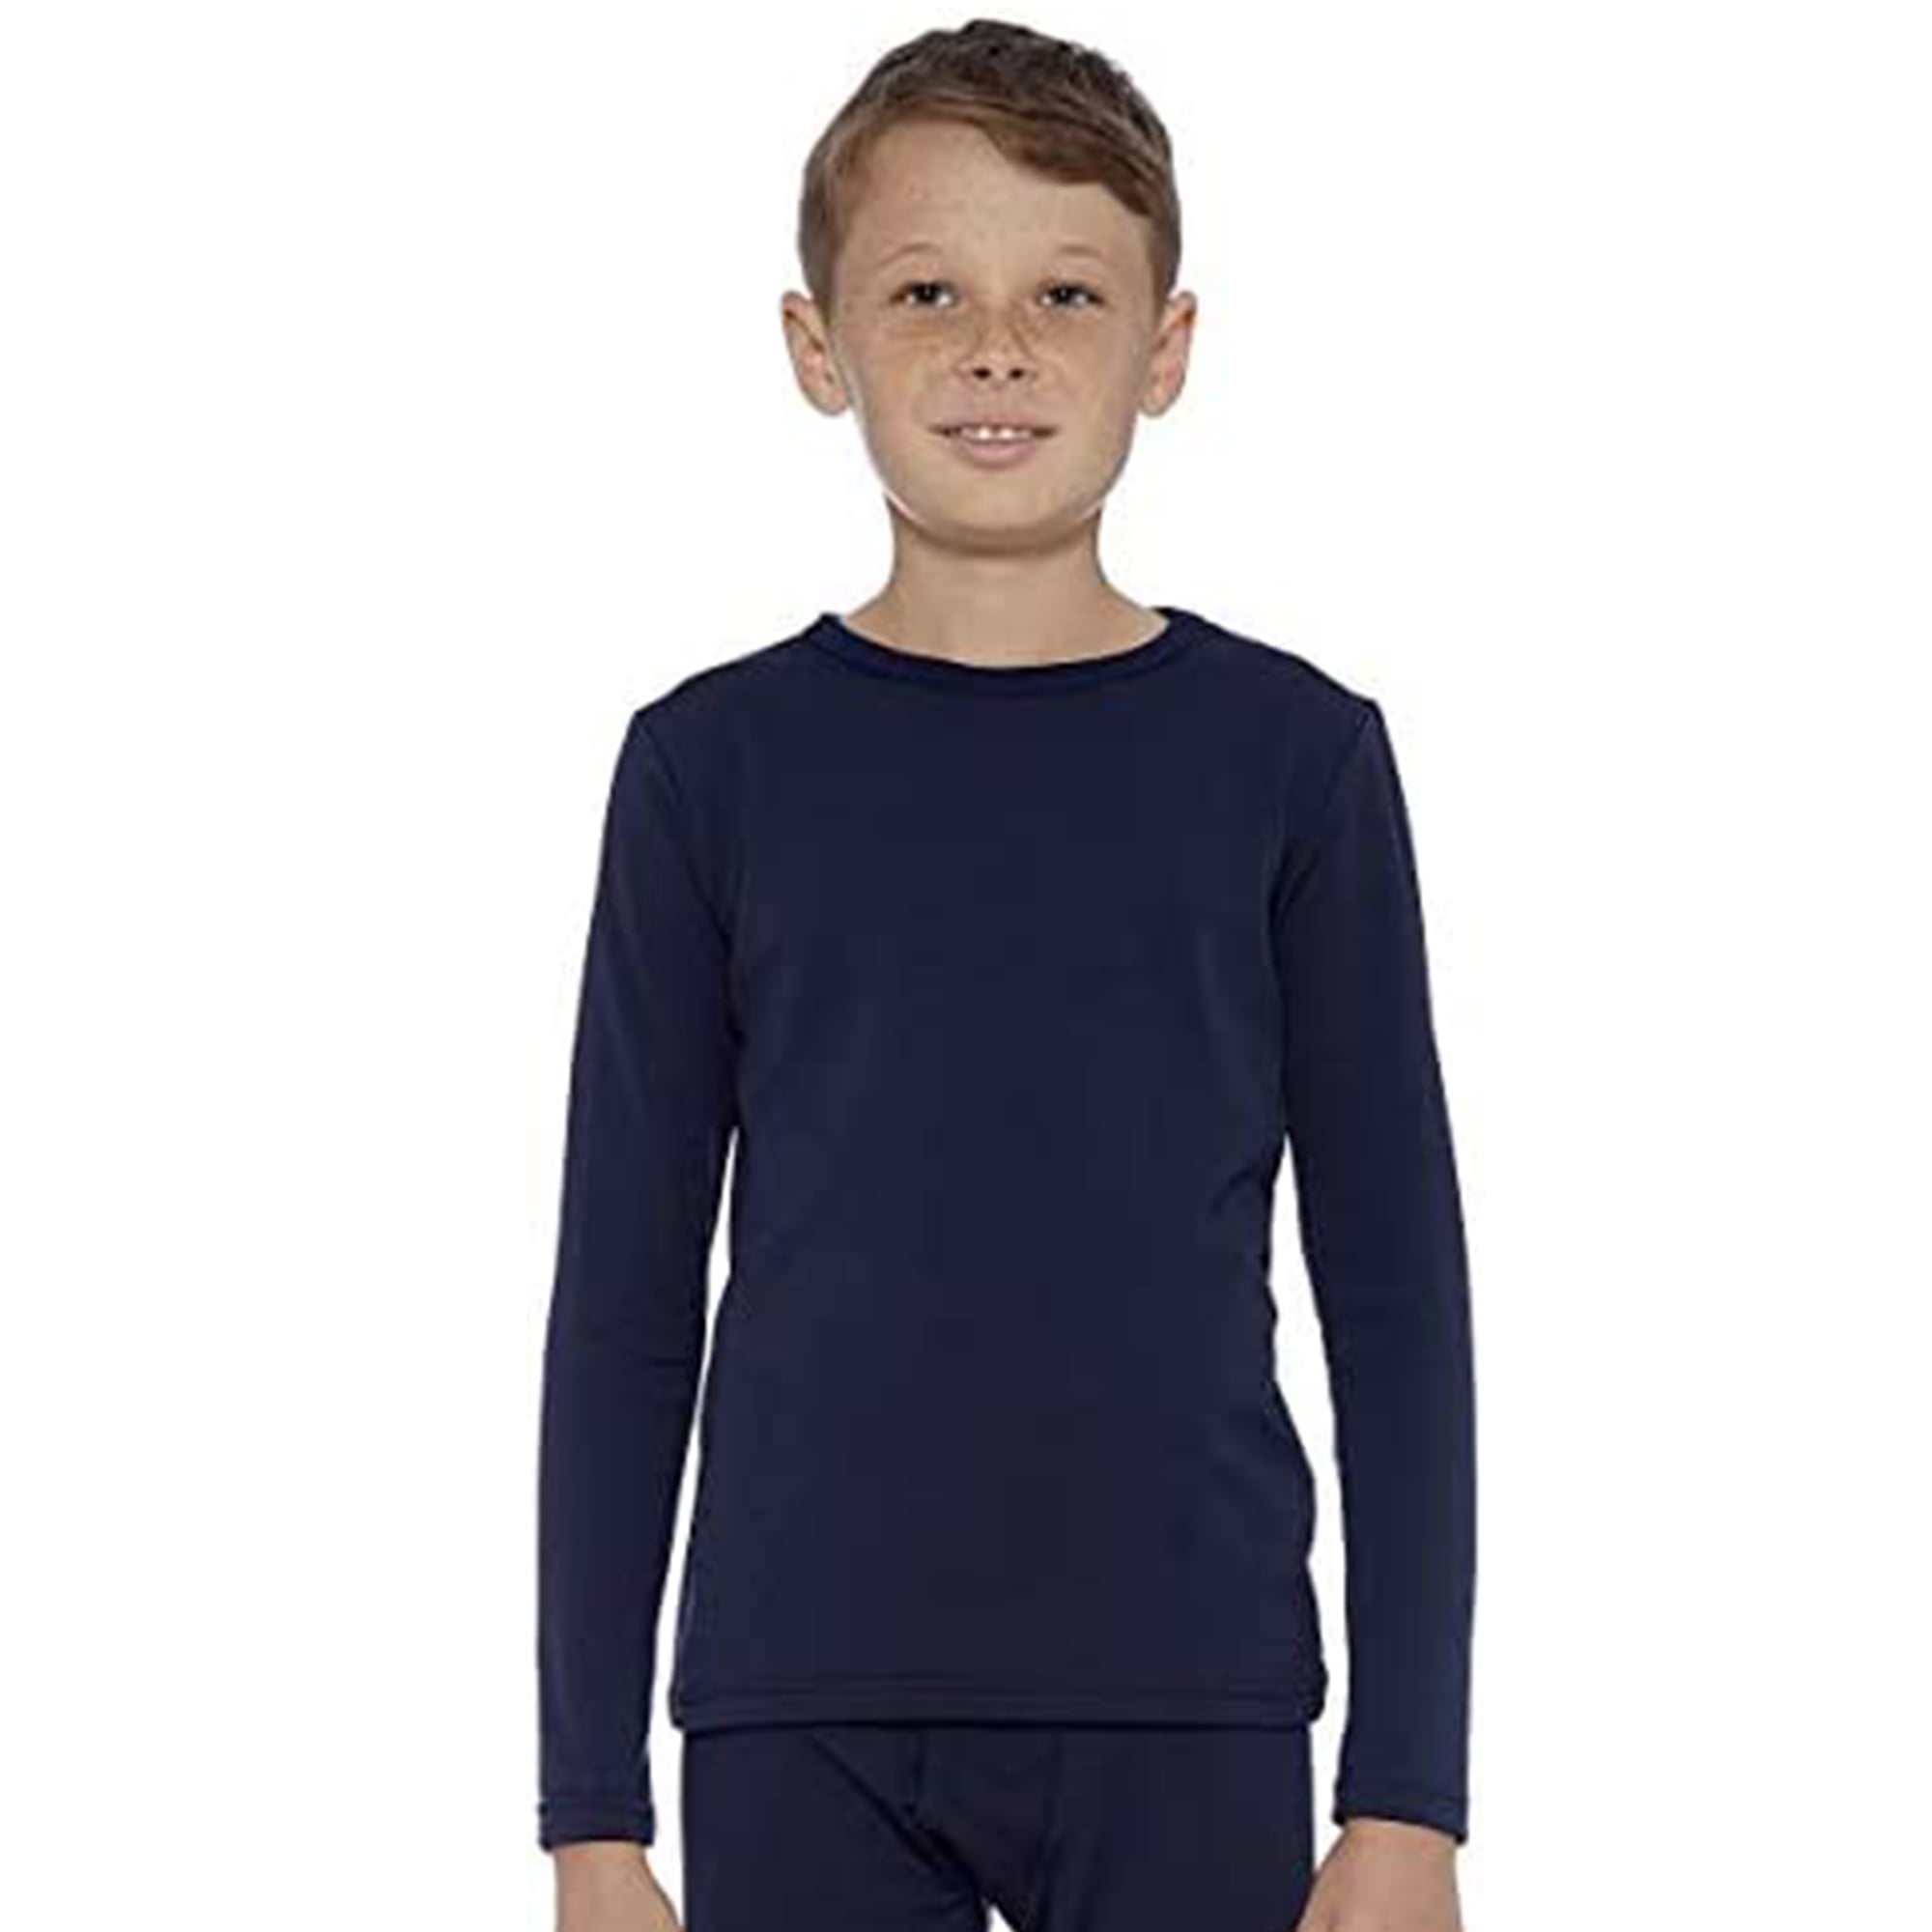 Rocky Thermal Underwear Shirt for Kids Base Layer Long Johns for